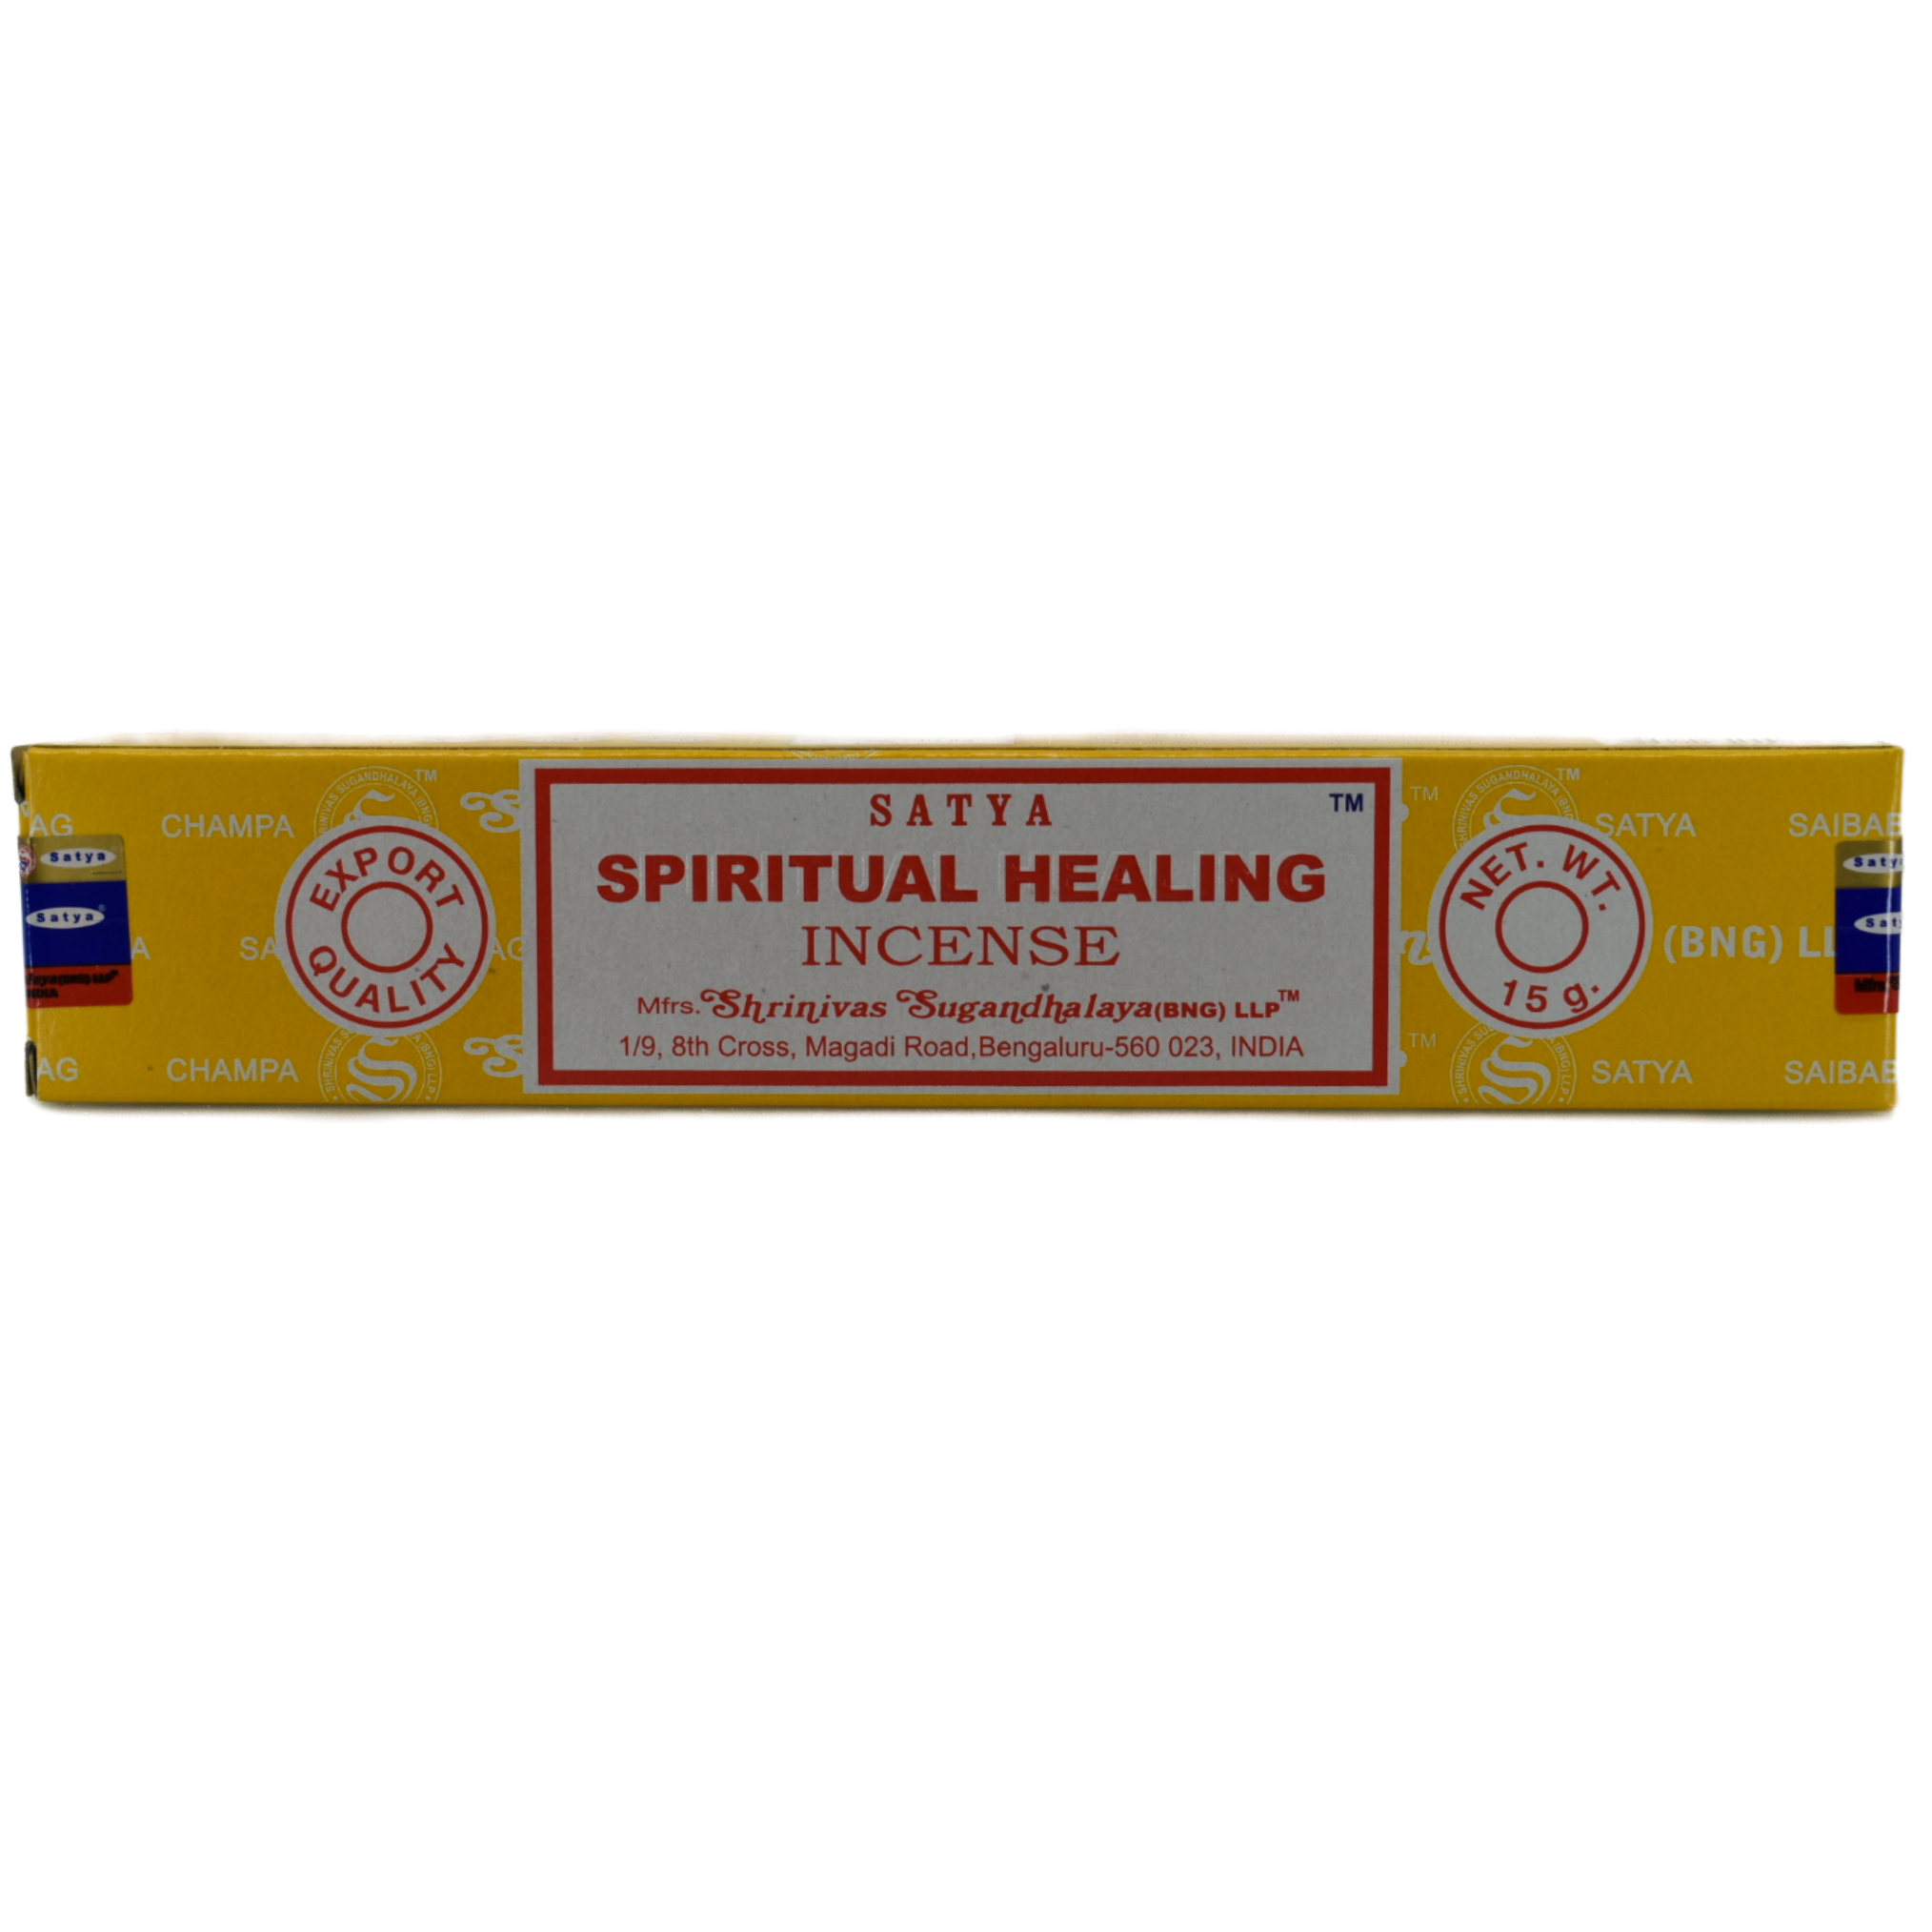 Spiritual Healing 15gr Incense Sticks back cover.  The back cover is the same as the front cover.